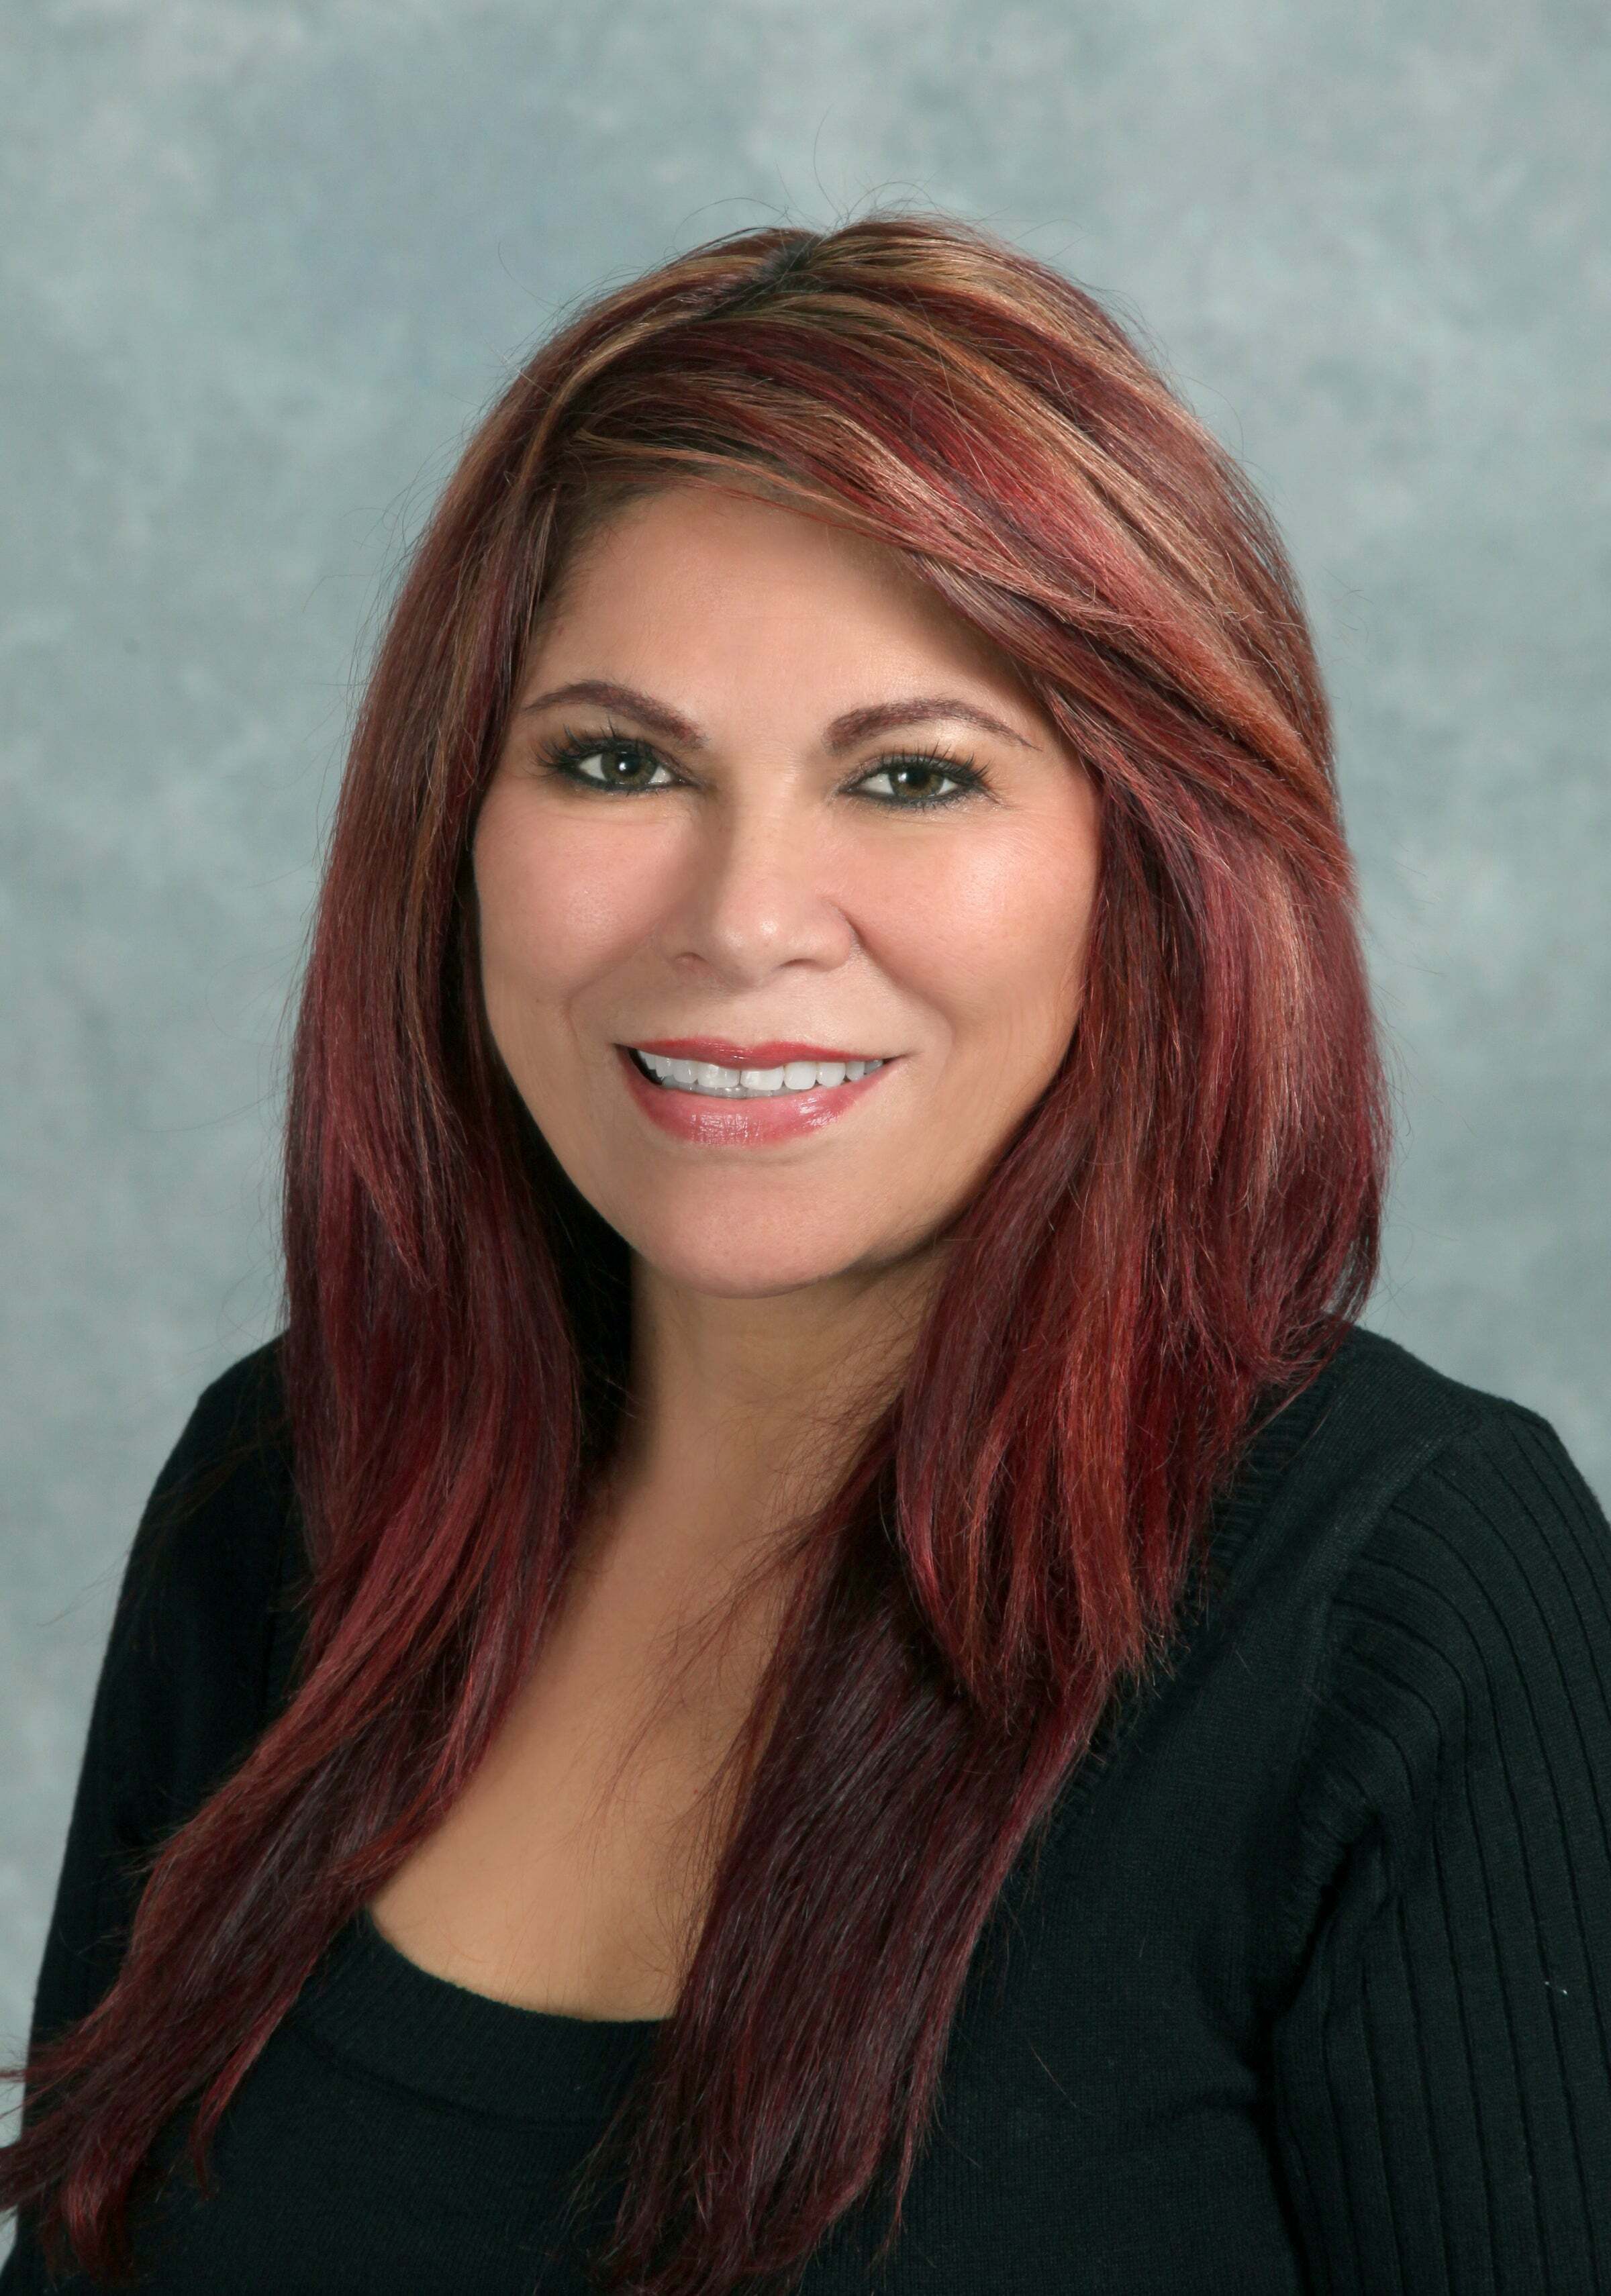 Fab Hoyos, Real Estate Salesperson in Irvine, Affiliated